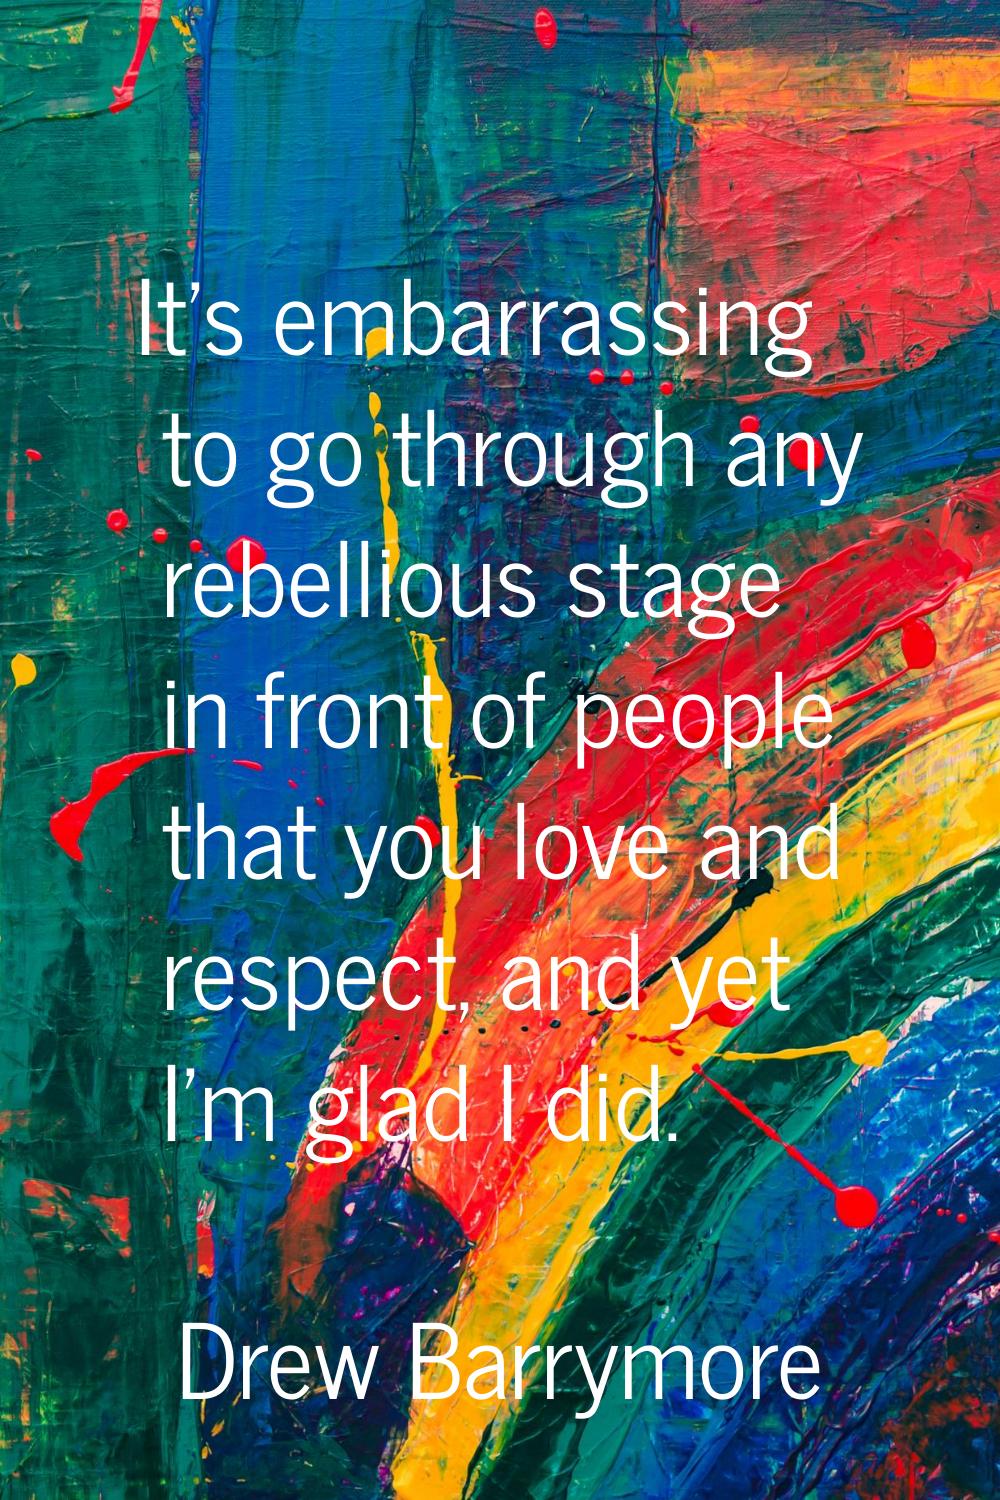 It's embarrassing to go through any rebellious stage in front of people that you love and respect, 